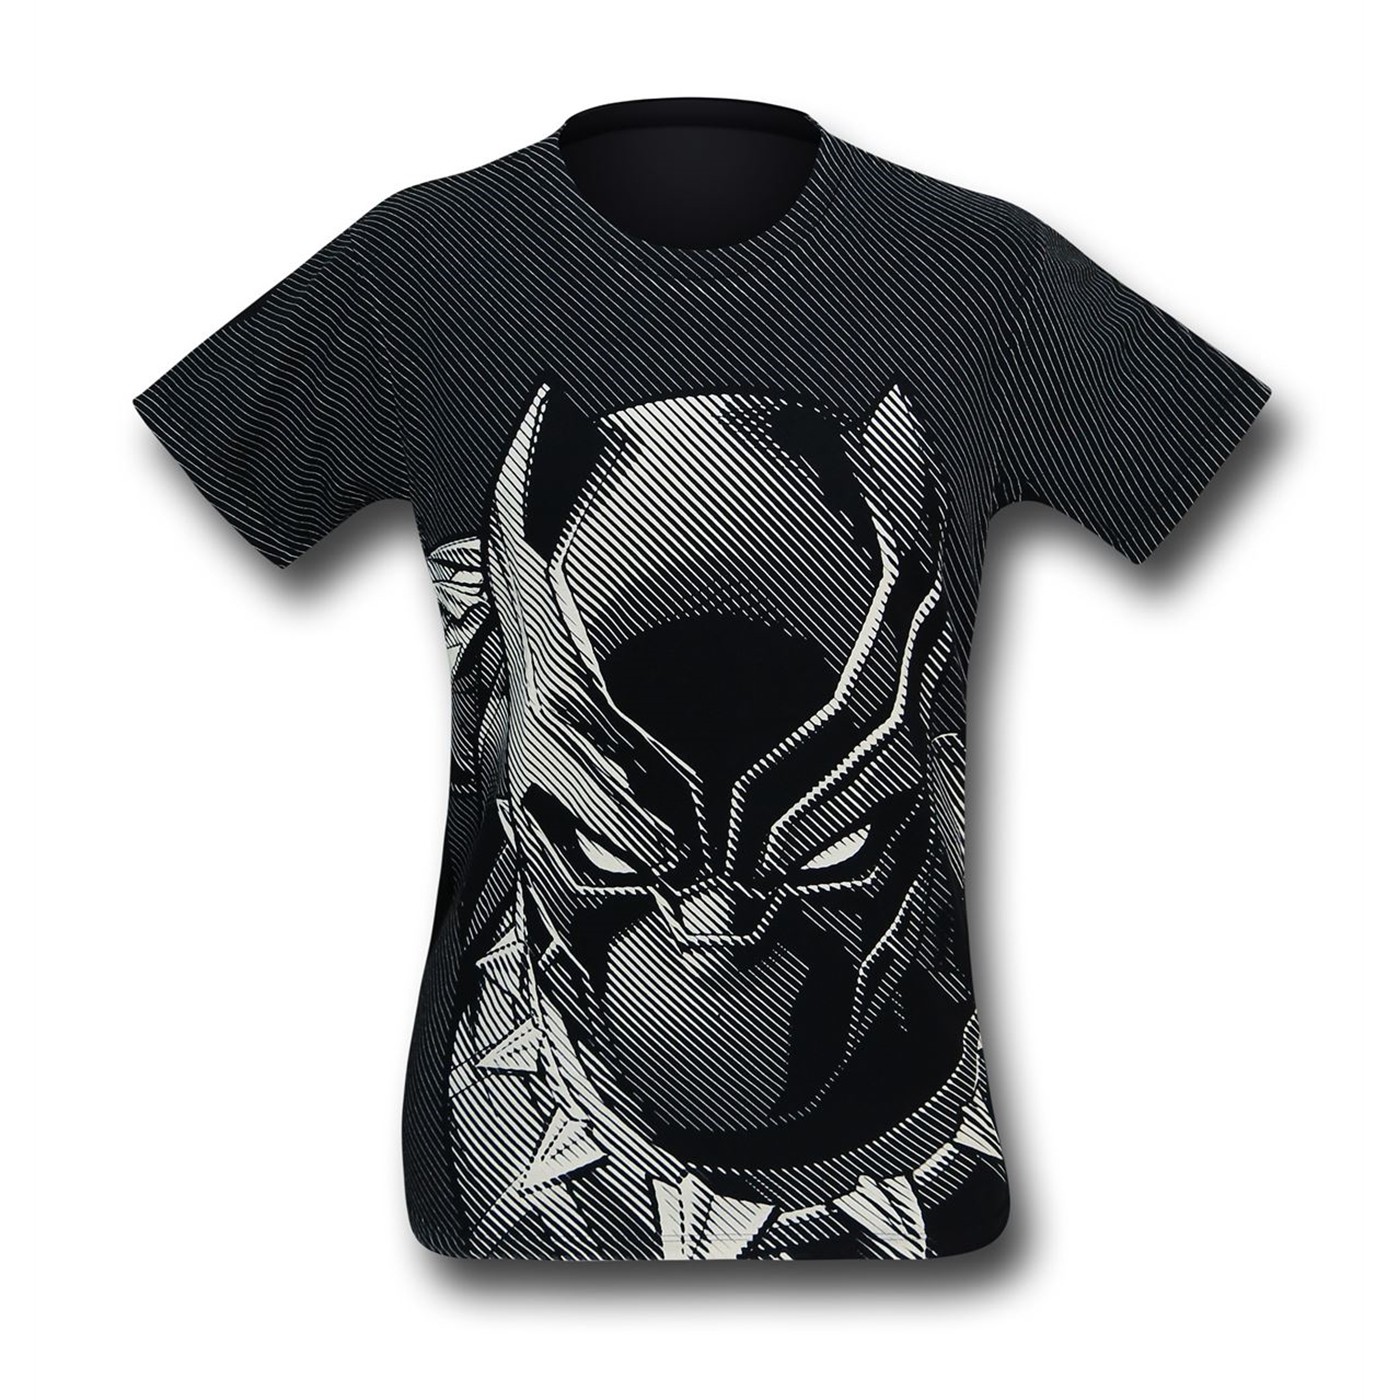 Black Panther All-Over Print Men's T-Shirt